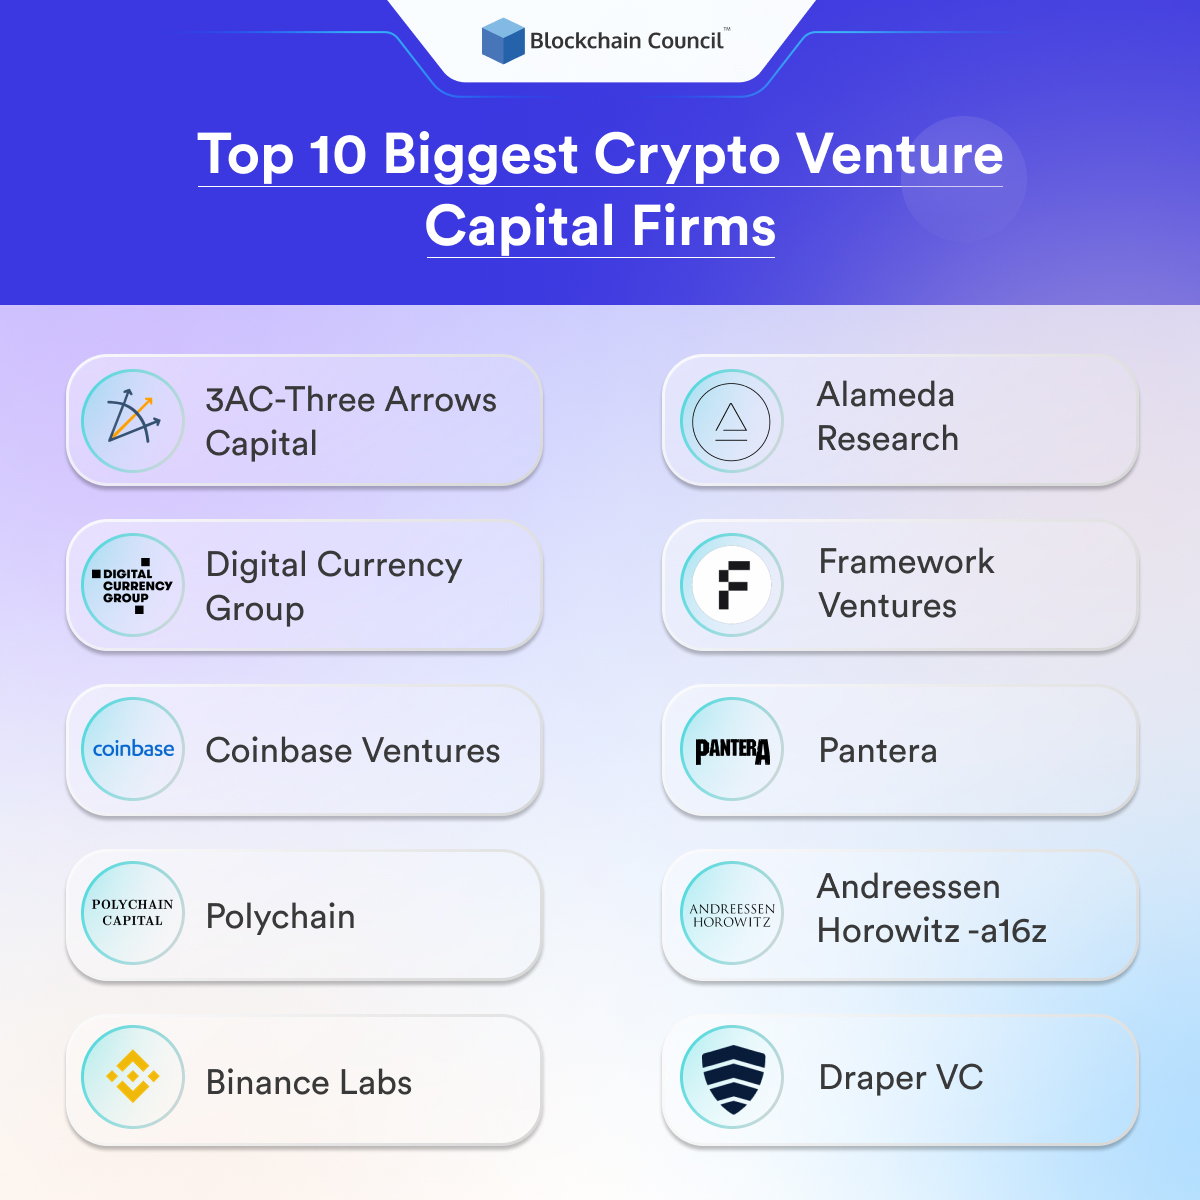 Top 10 biggest crypto venture capital firms
